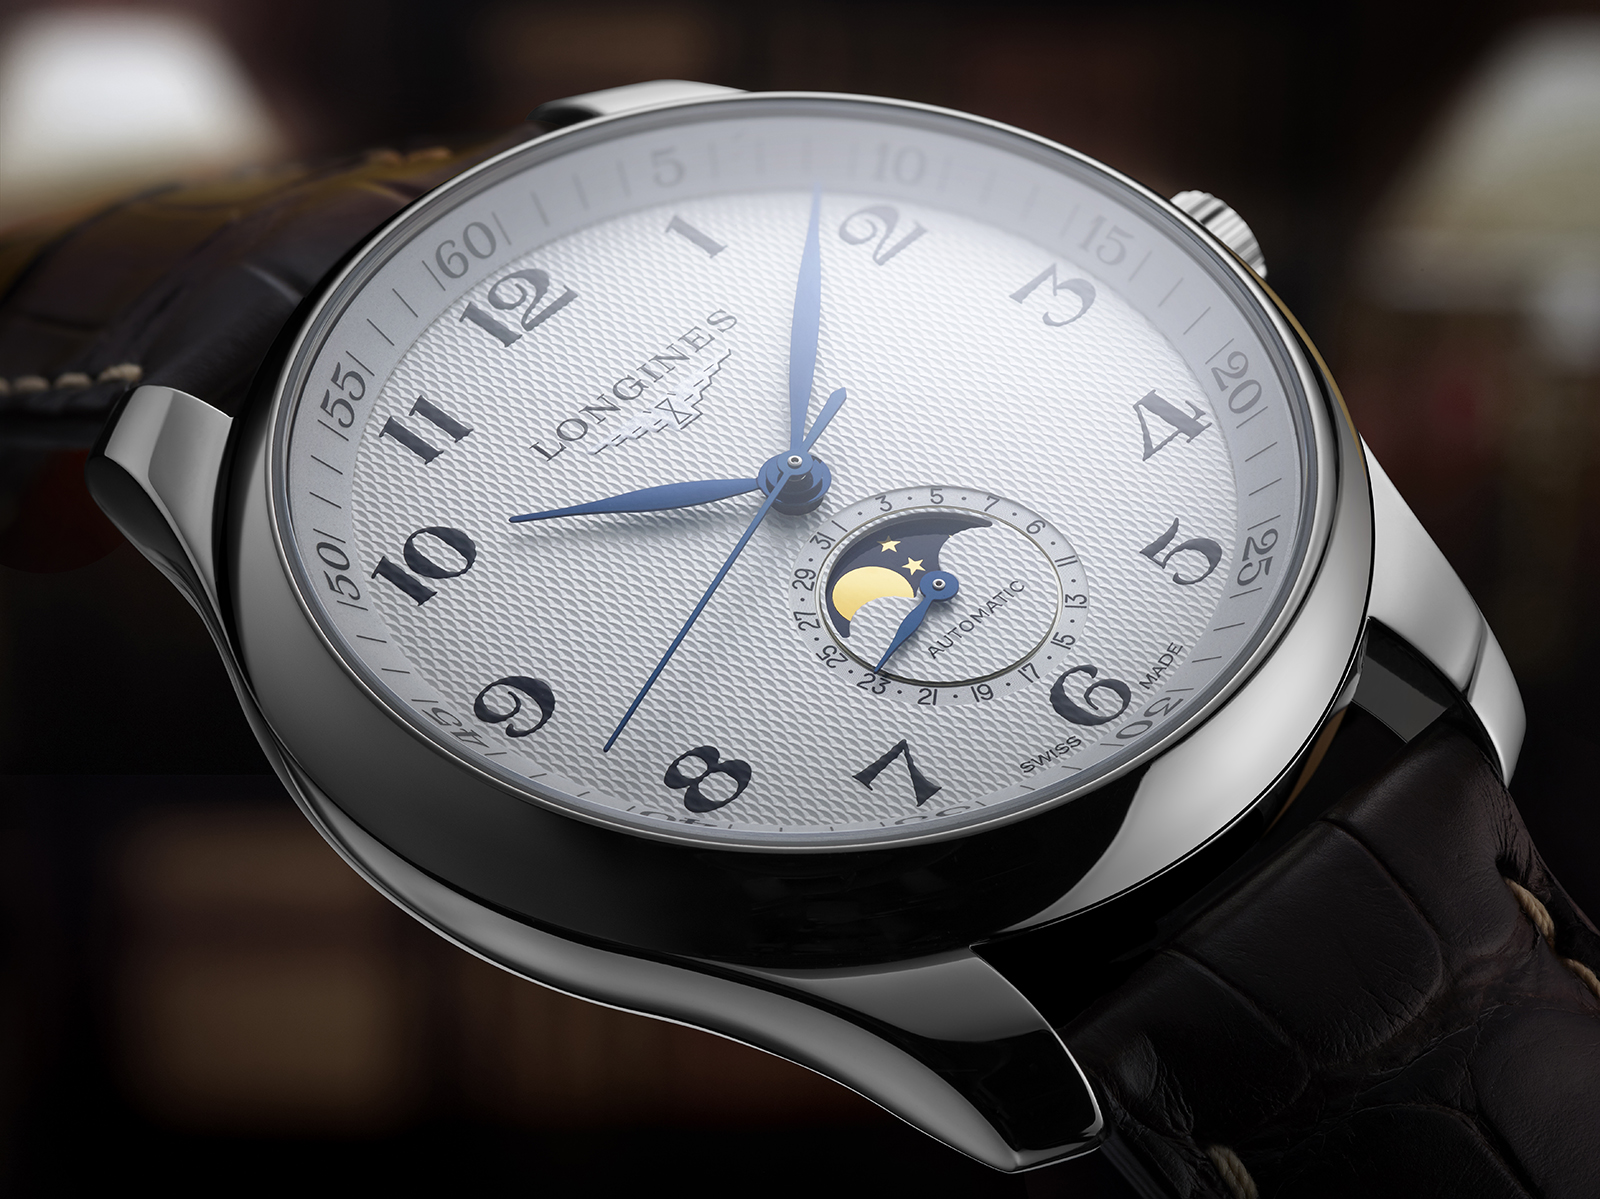 The Longines Master Collection Moon Phase